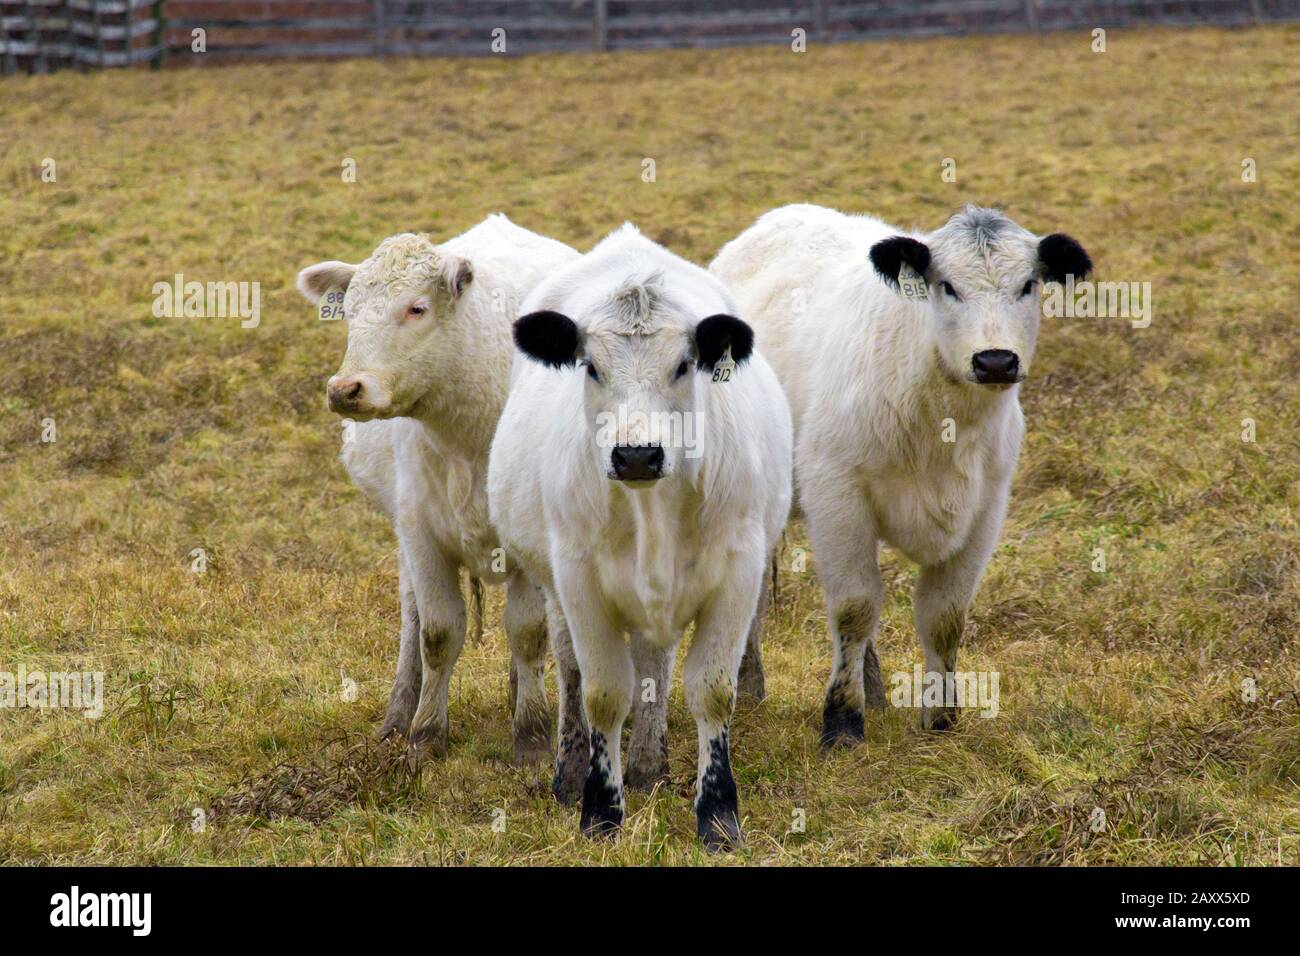 British White Cattle are a rare breed used mainly for beef but also some dairy. It has a confirmed history dating back to the 17th century. Stock Photo